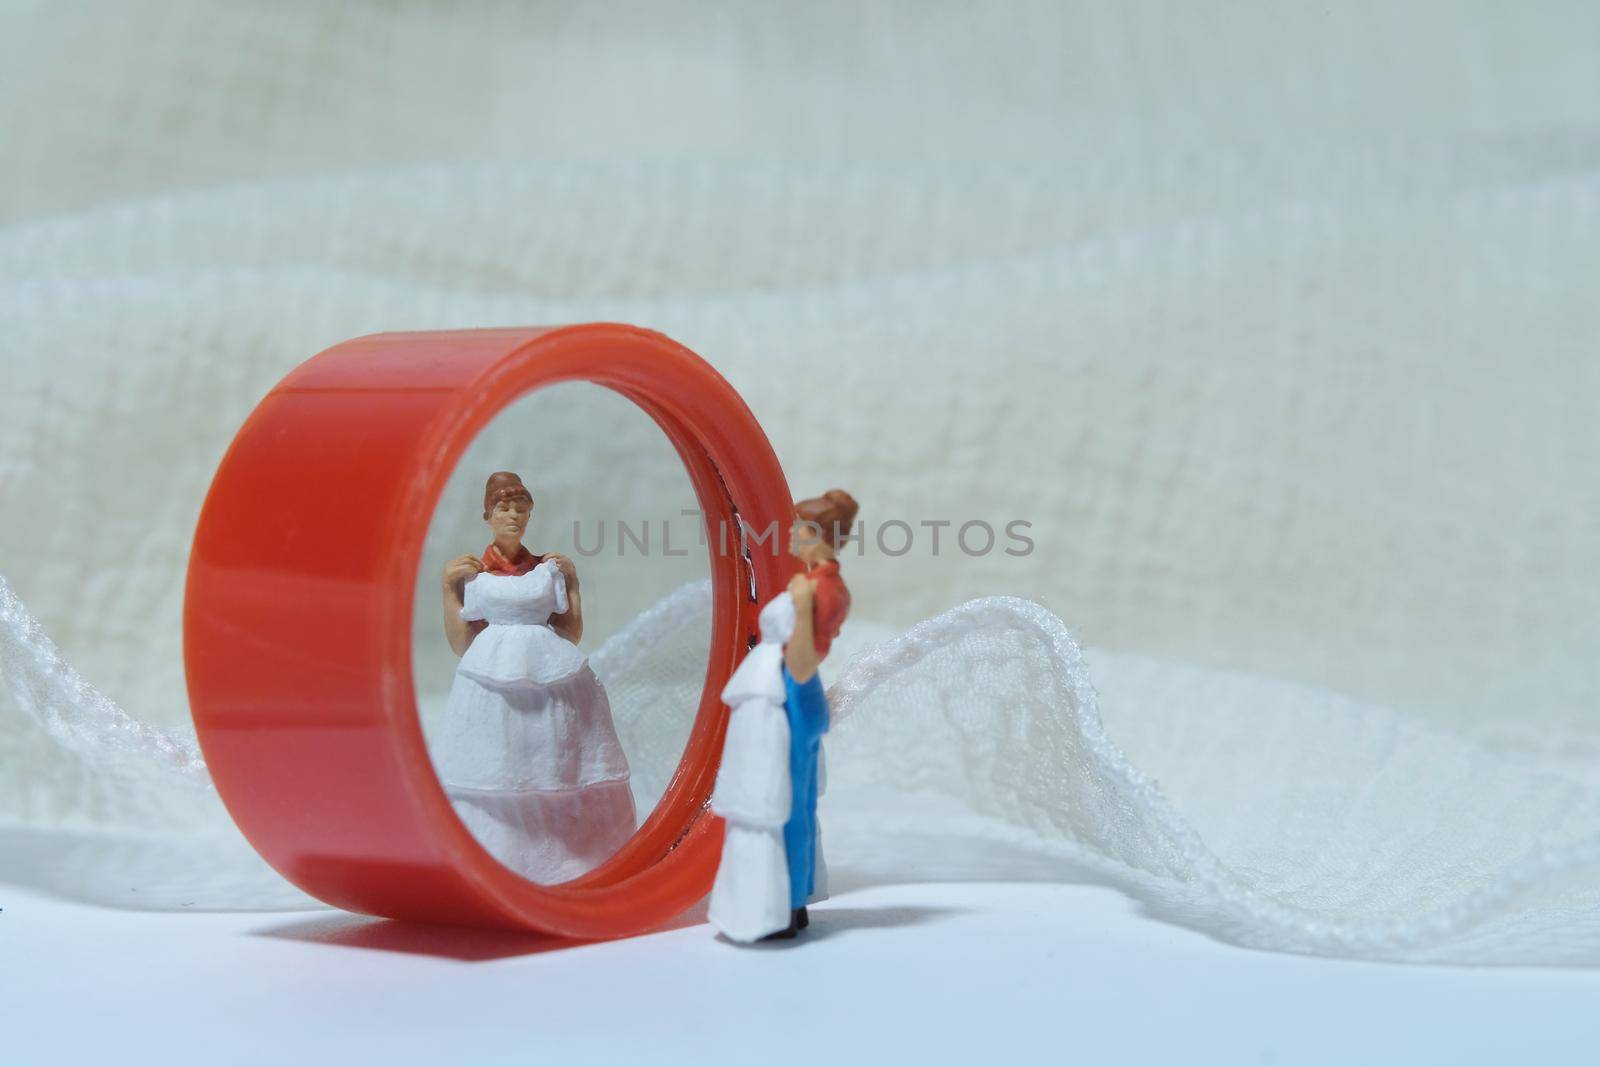 Women miniature people stand in front of mirror trying wedding dress. Image photo by Macrostud